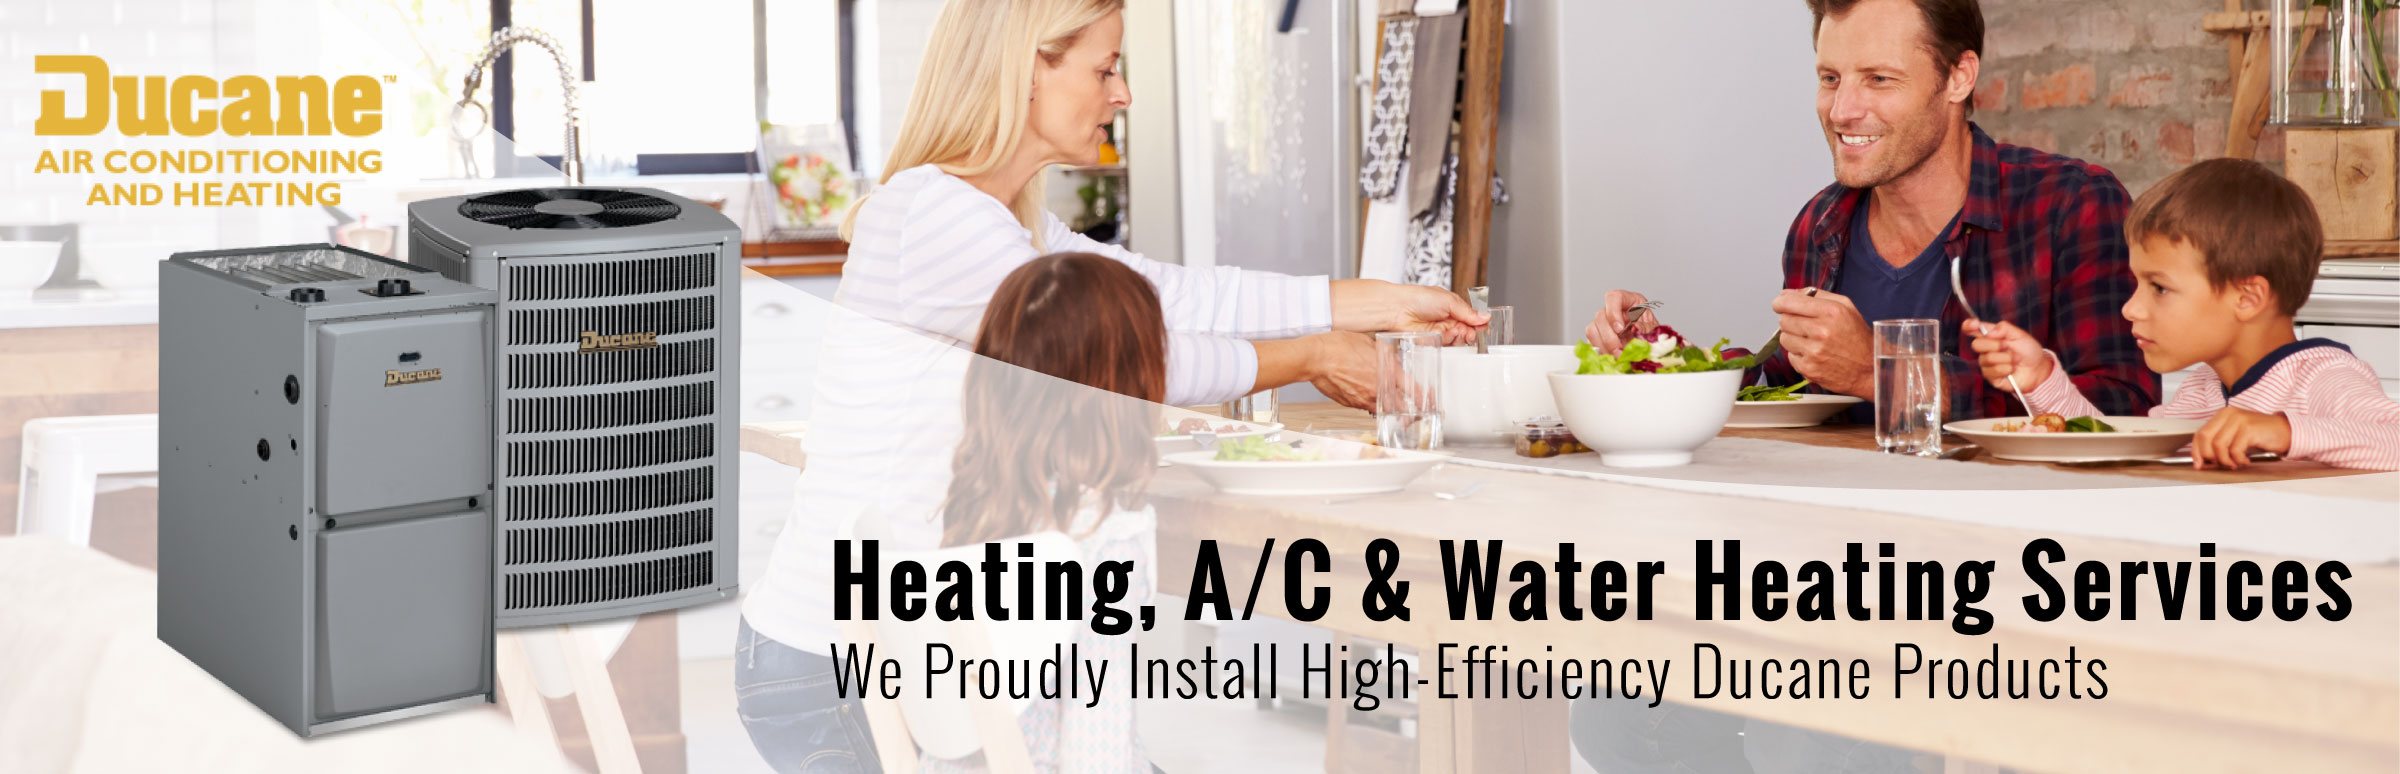 Air Magician is your Heating, A/C, & Water Heating Services - We porudly install High-Efficiency Ducane Heating & Cooling Systems.